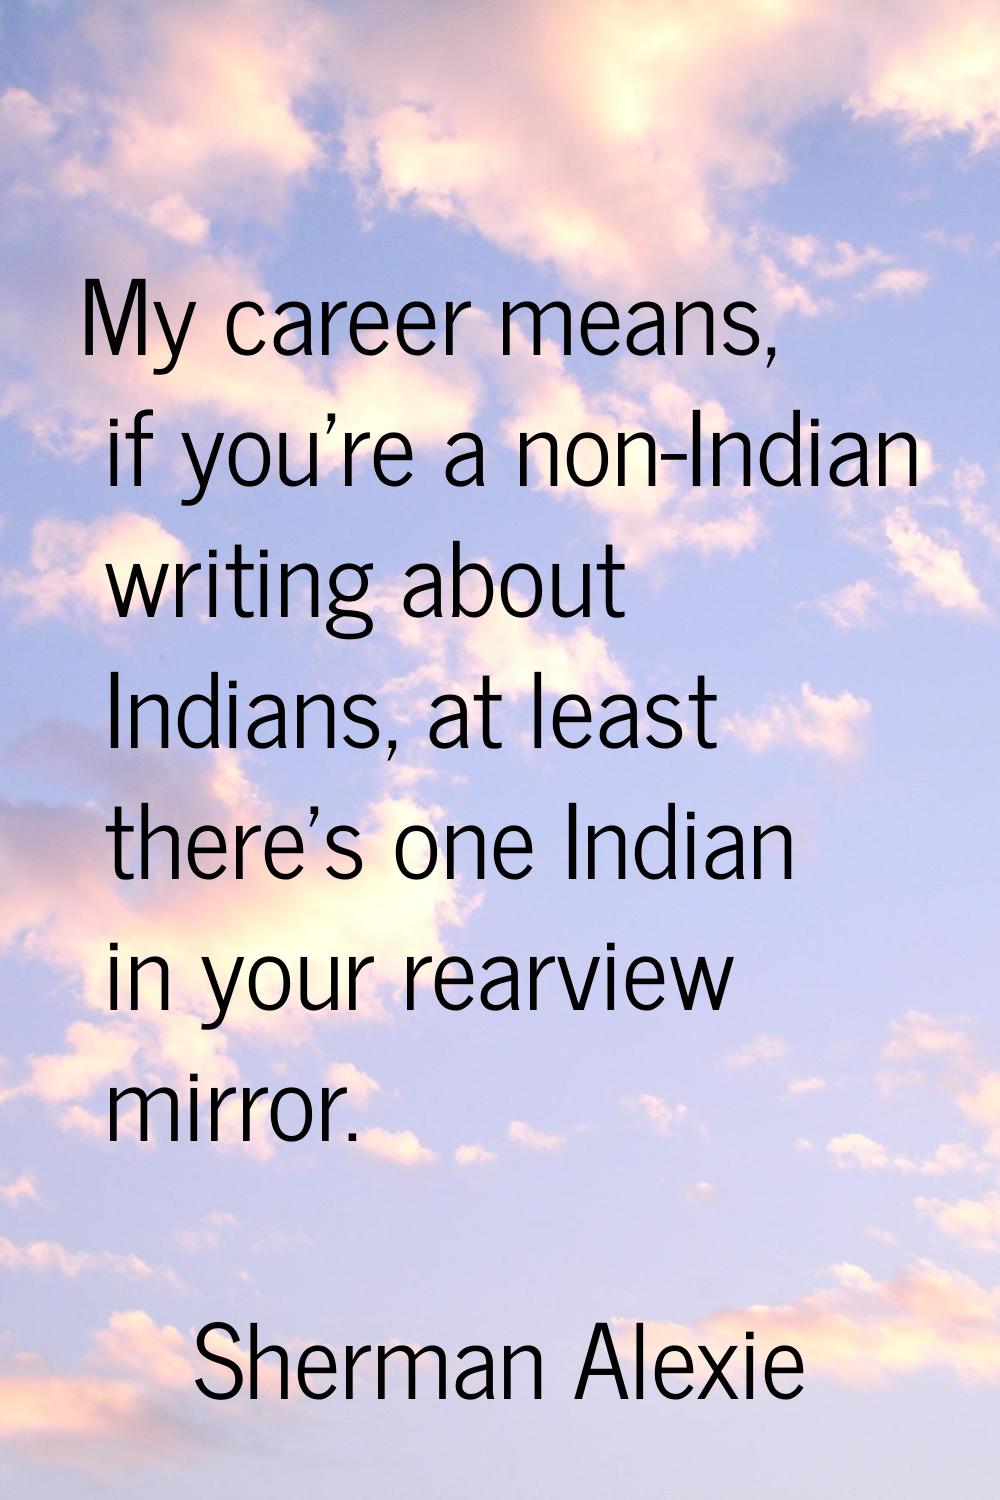 My career means, if you're a non-Indian writing about Indians, at least there's one Indian in your 